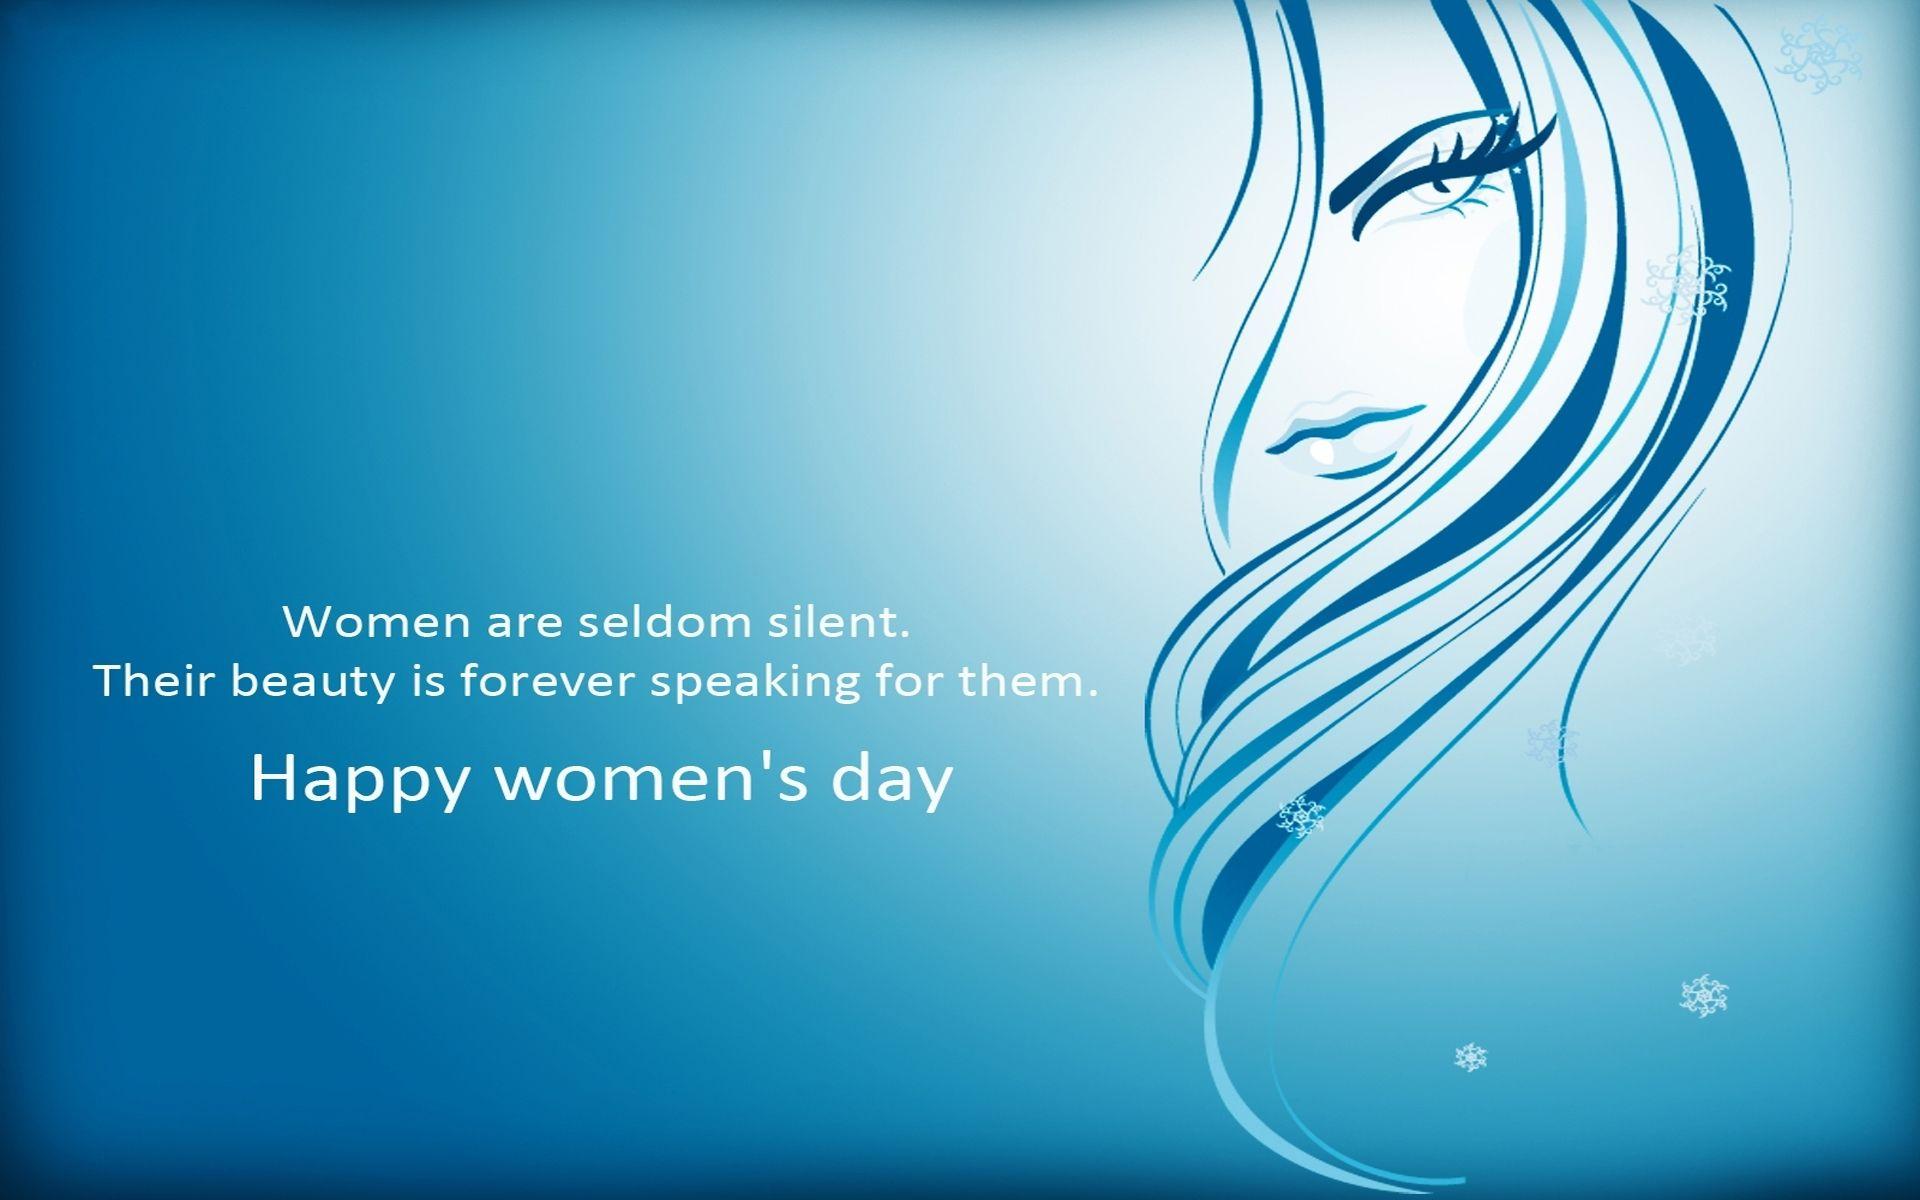 Women's Day 2017 HD Wallpaper, Facebook Cover Photo & Banners